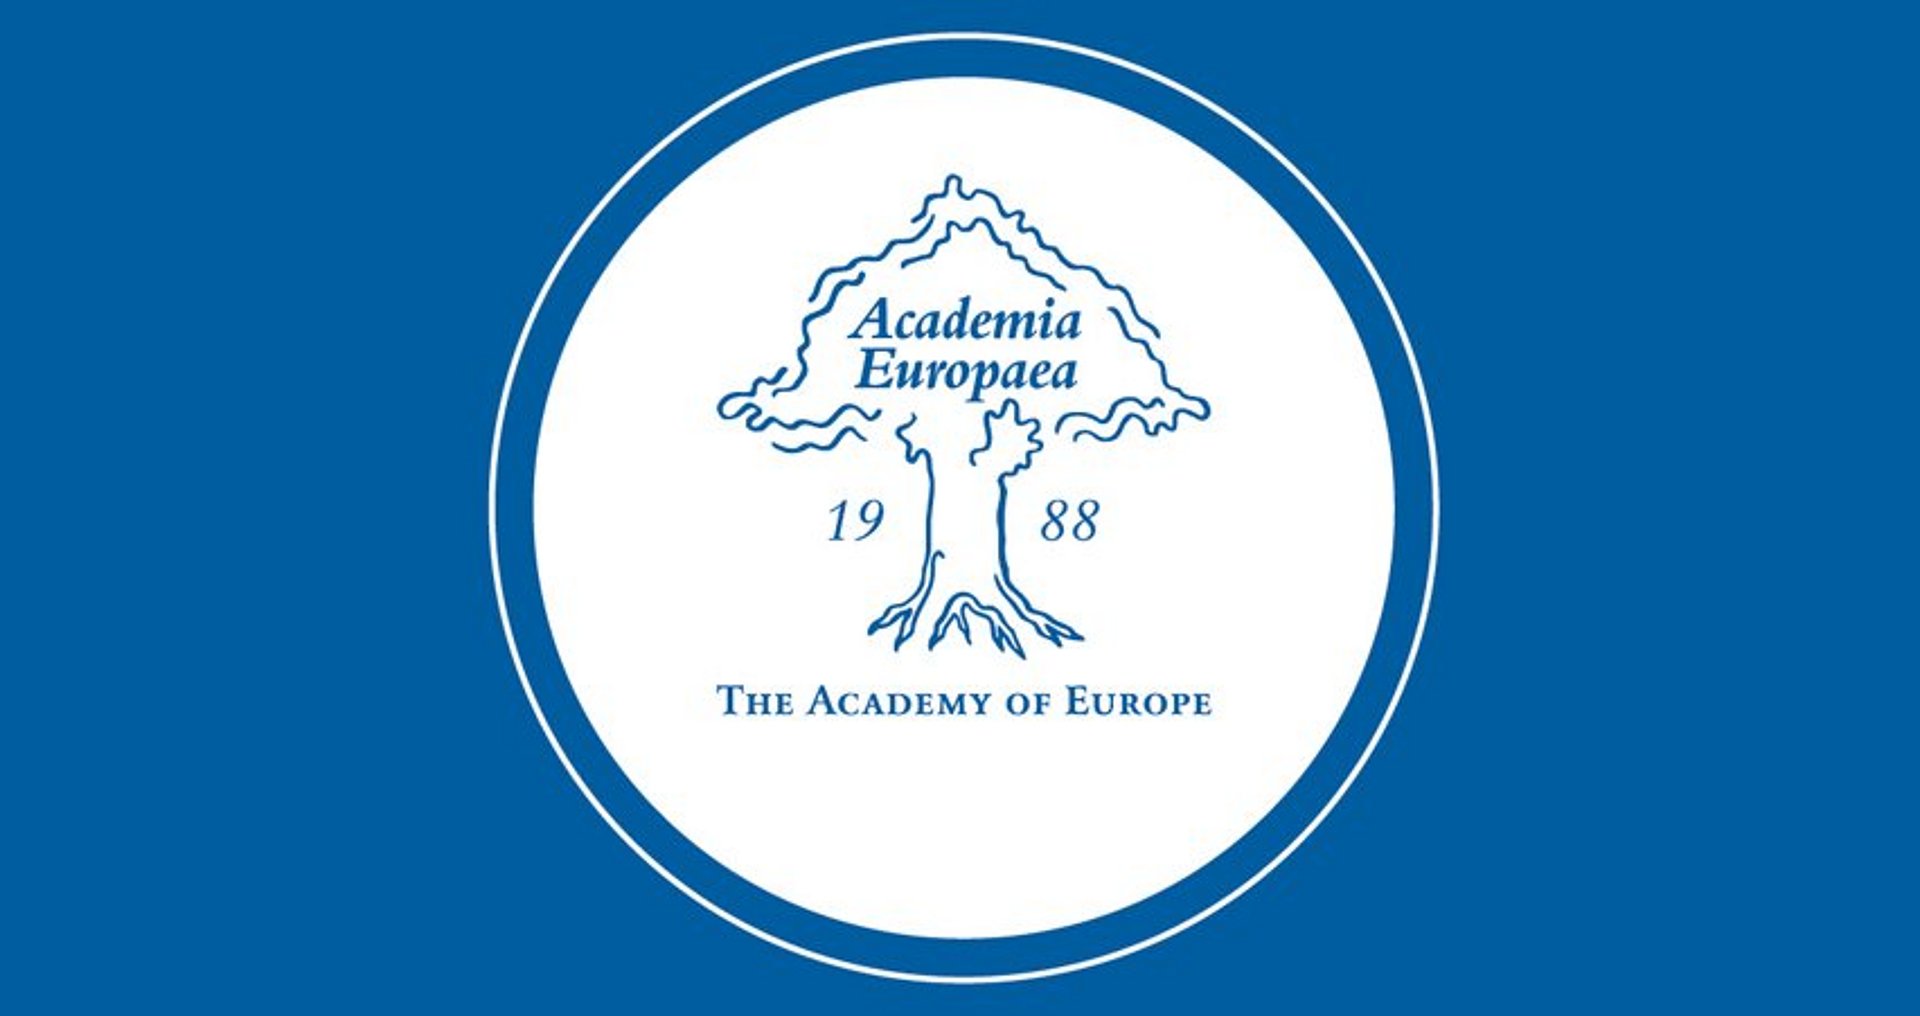 Academia Europaea was founded in Cambridge (UK) in 1988.